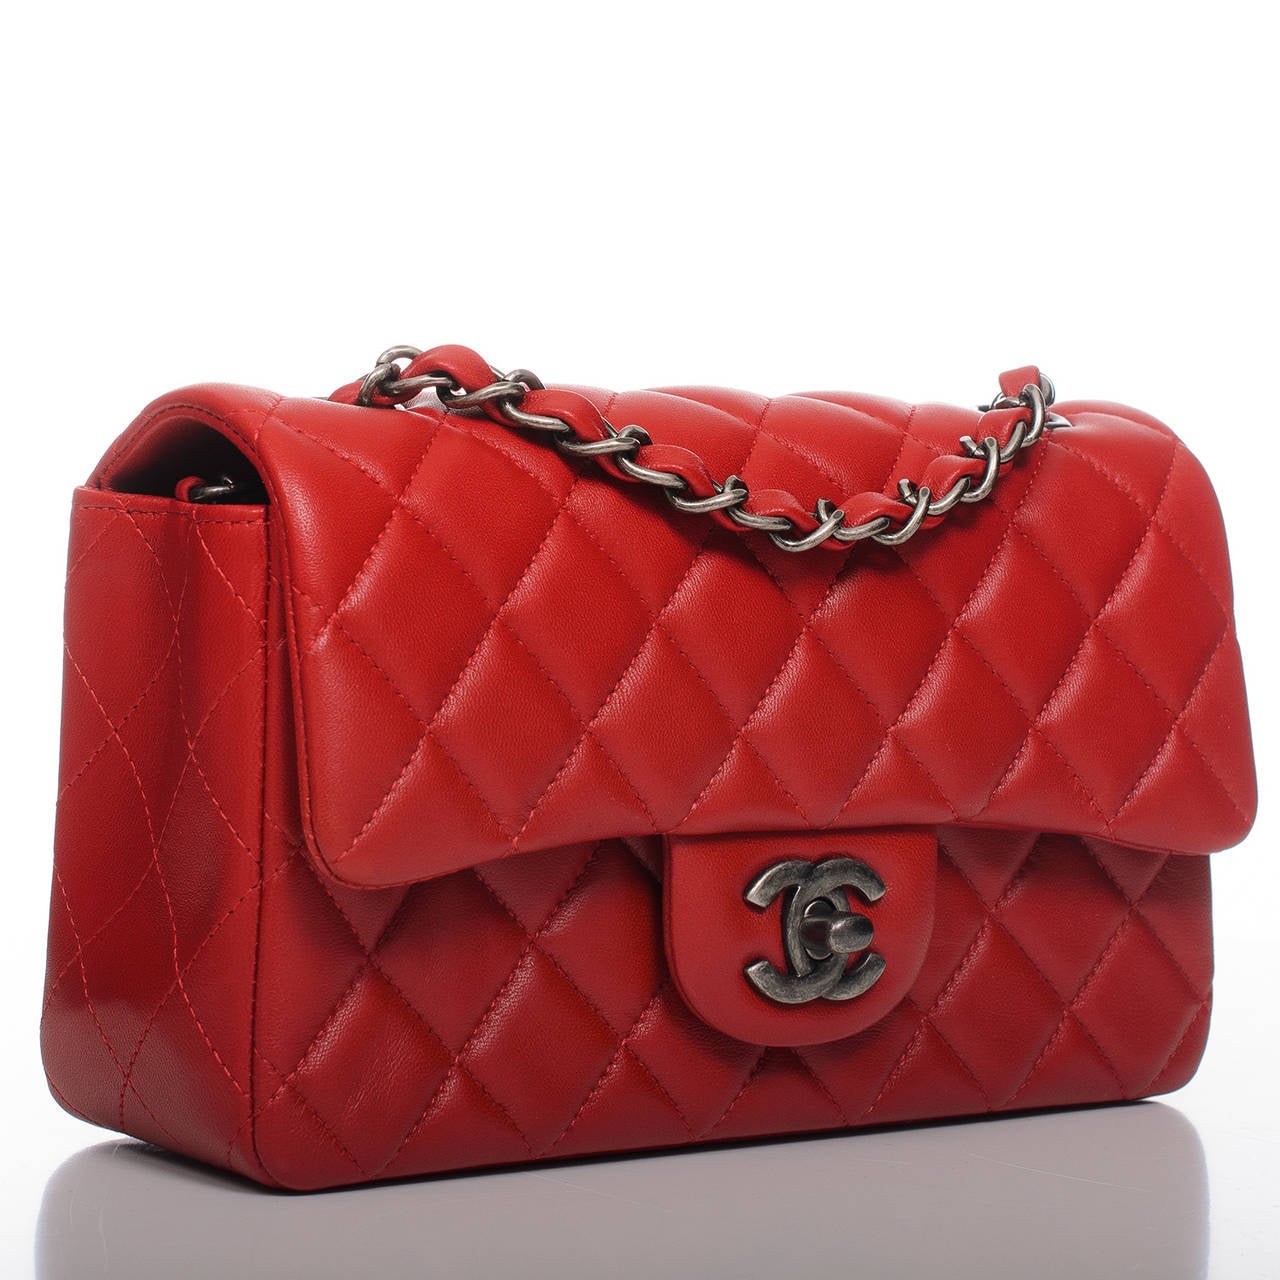 Chanel red Small Classic 2.55 flap bag in quilted lambskin leather with ruthenium hardware.

Named 2.55 to honor the bag's creation in February 1955, the iconic Chanel bag was a modification of the bag Coco Chanel originally designed in 1929.